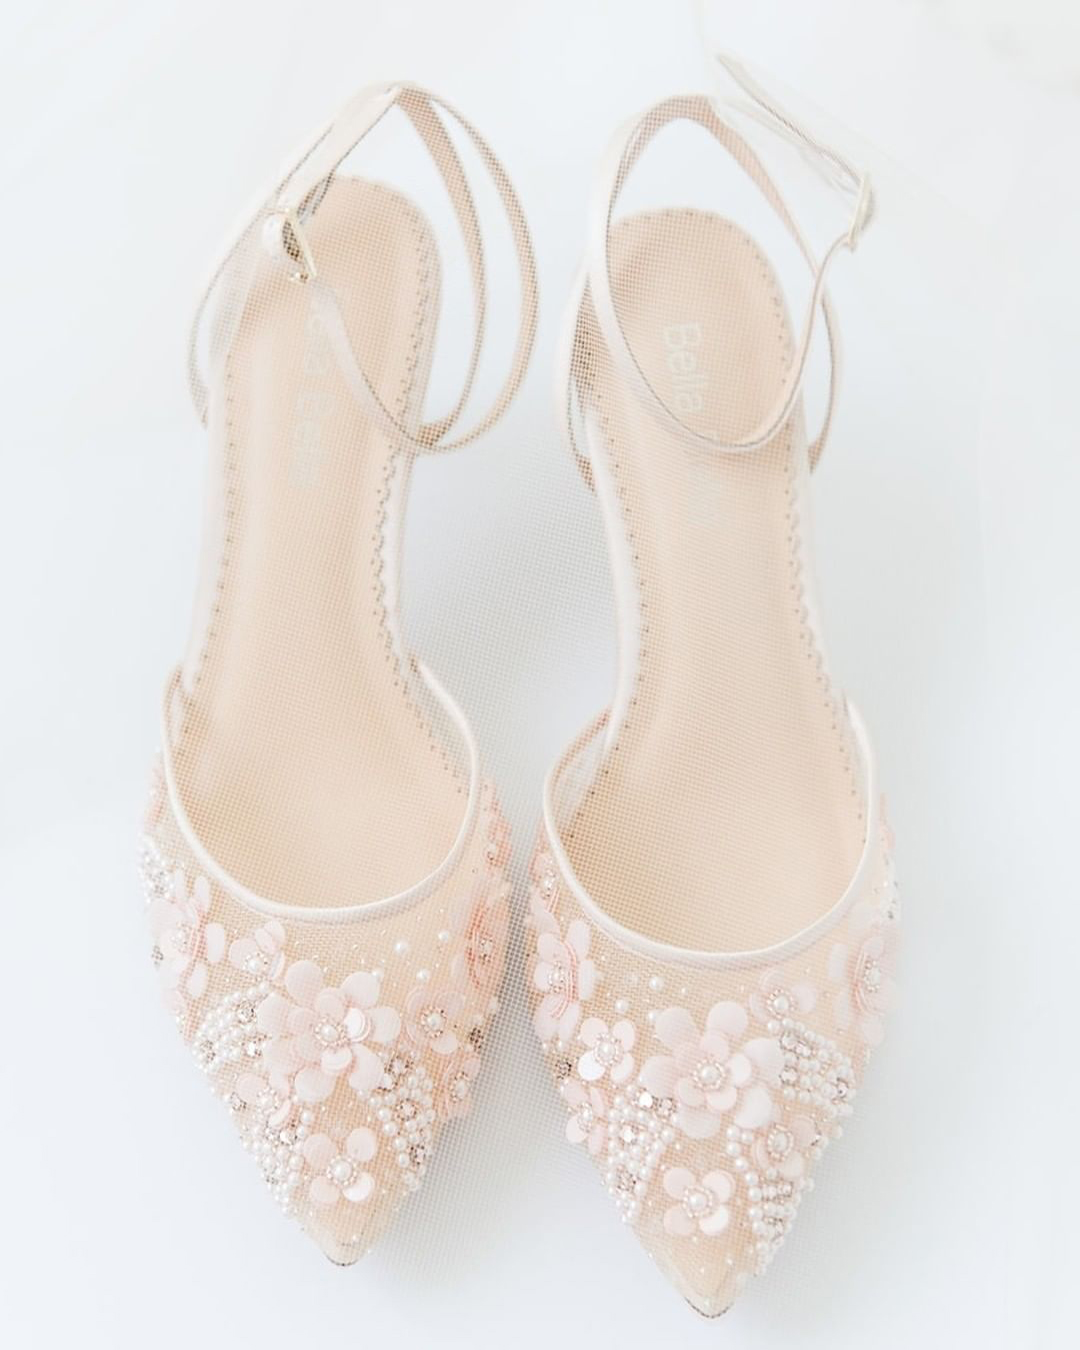 non traditional wedding shoes nude floral bellabelleshoes